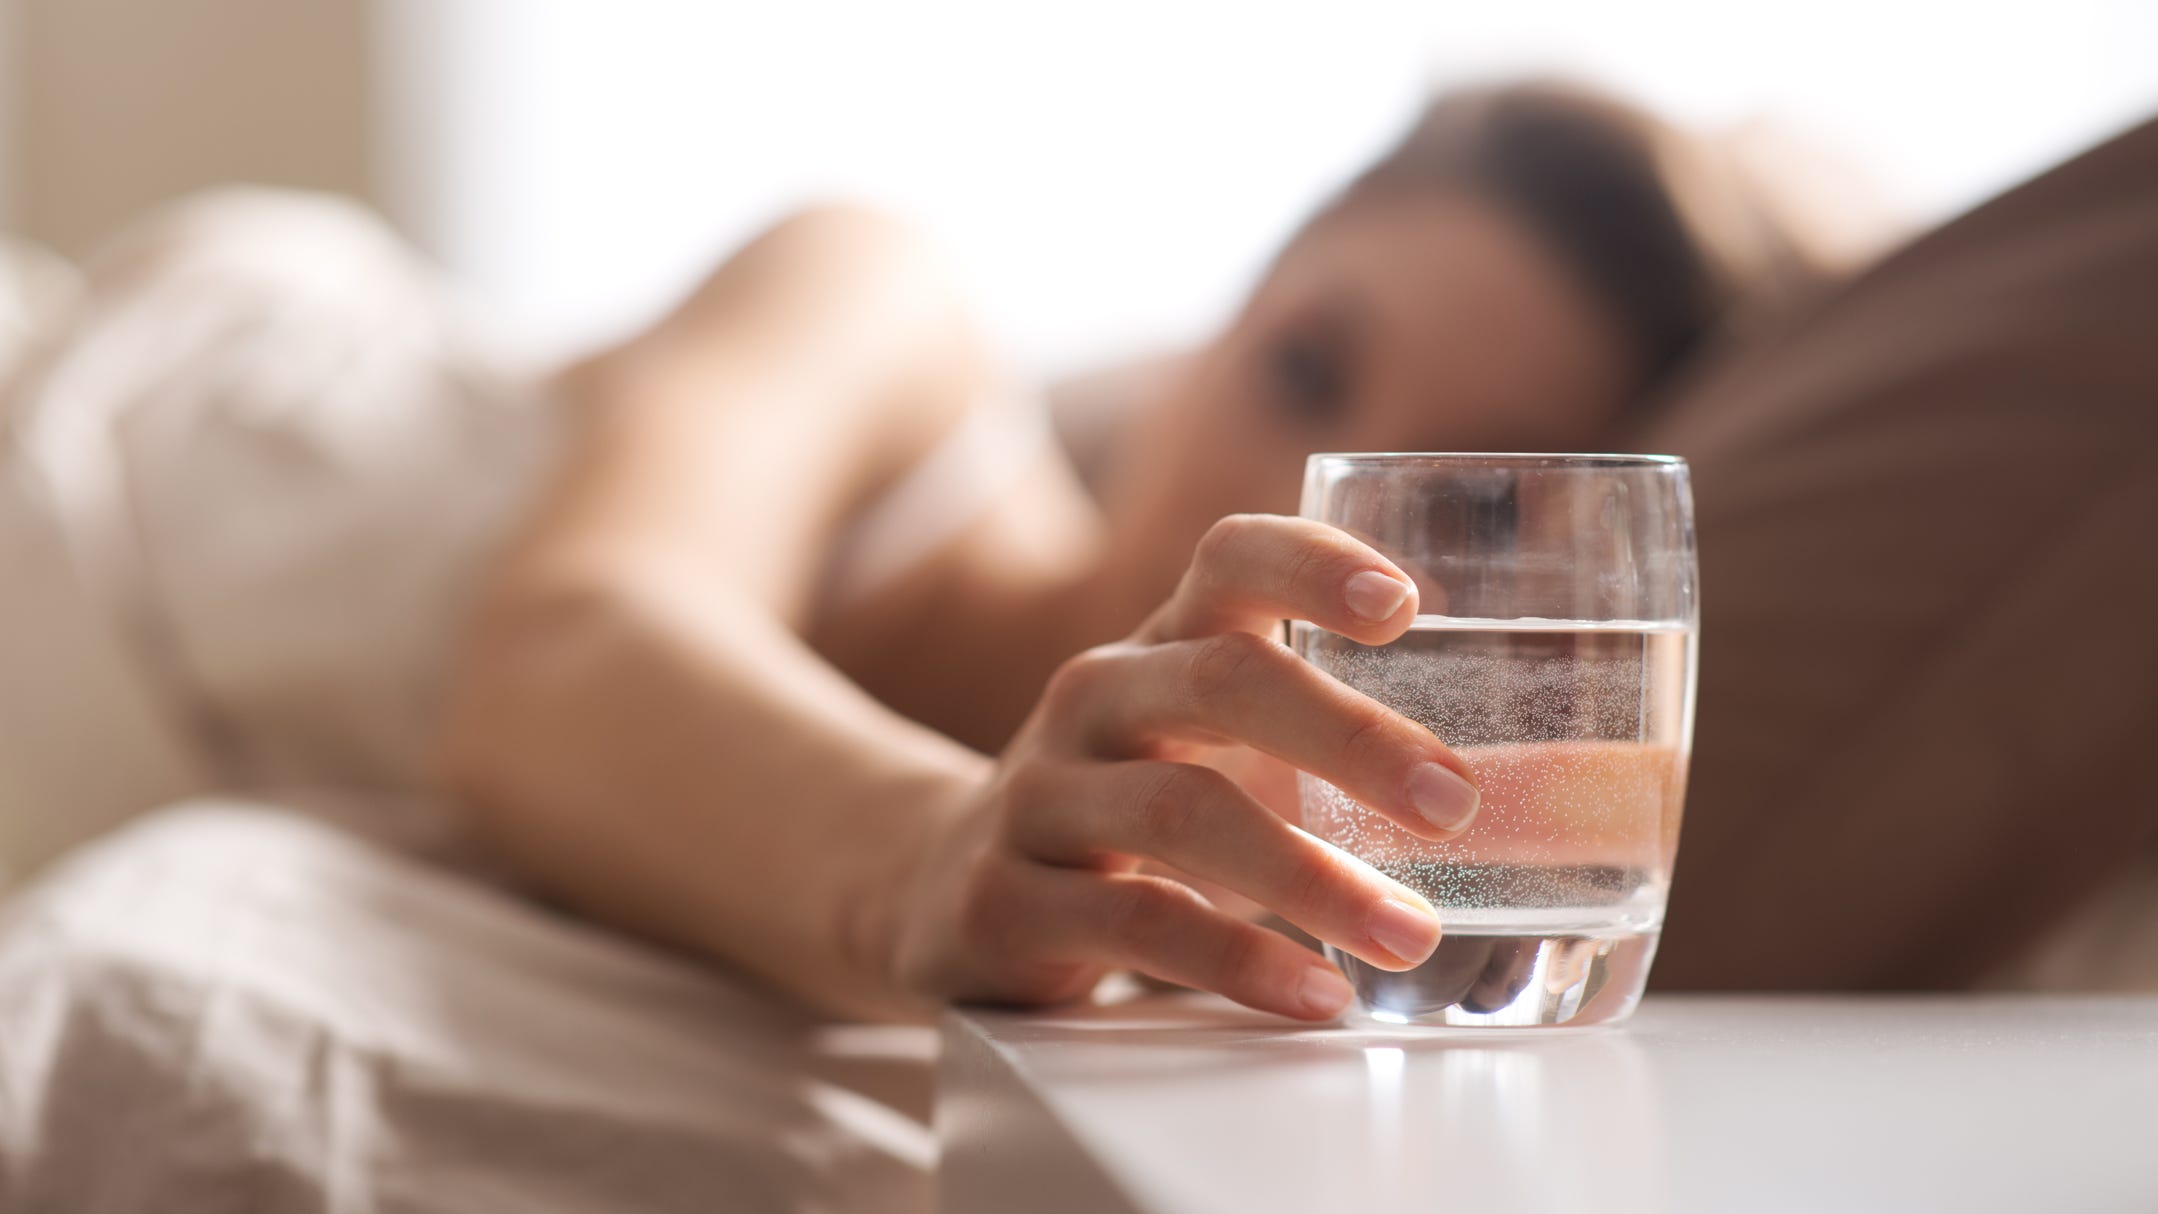 Water every morning first thing has health benefits, experts say